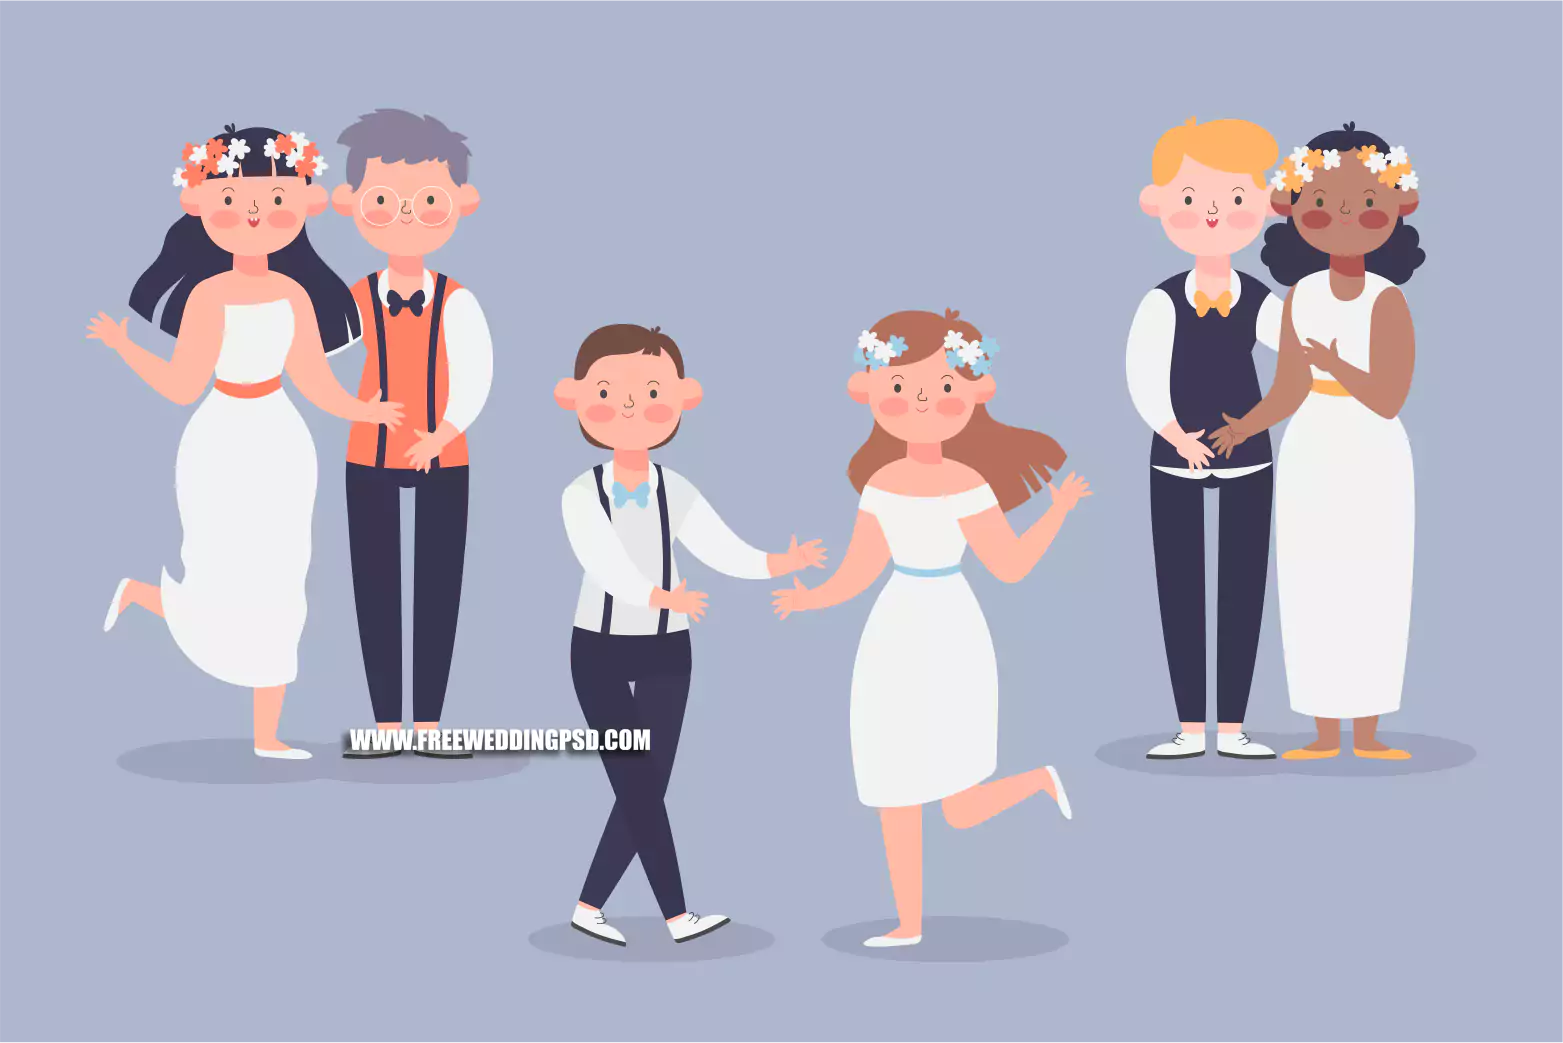 wedding couple clip-art psd file free Download 2021